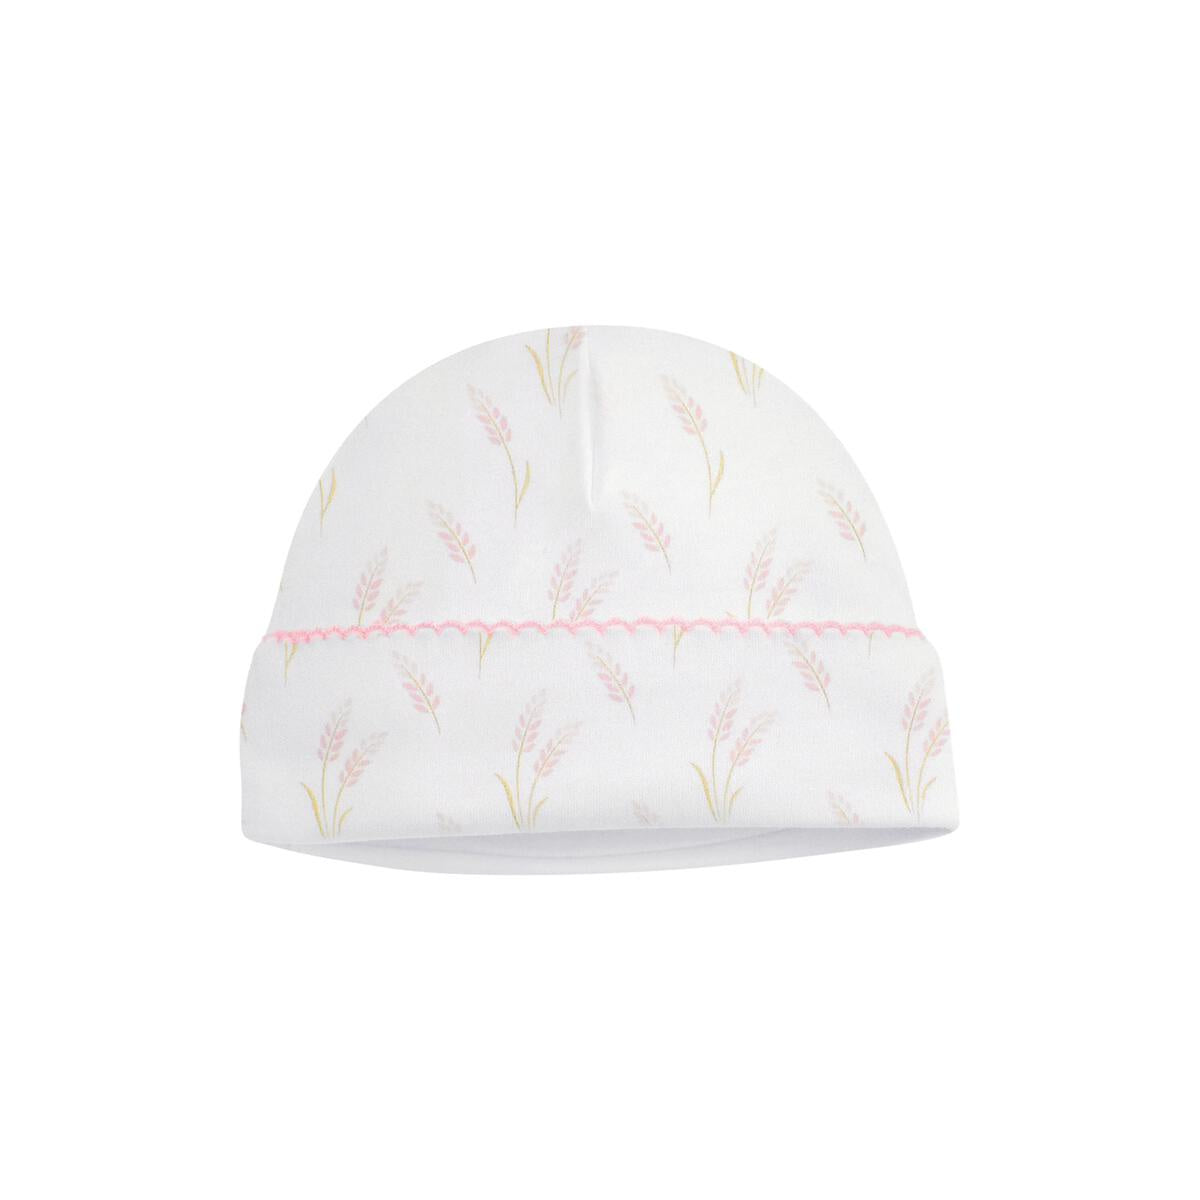 Lyda Baby White Wheat Spikes Hat NB 5007